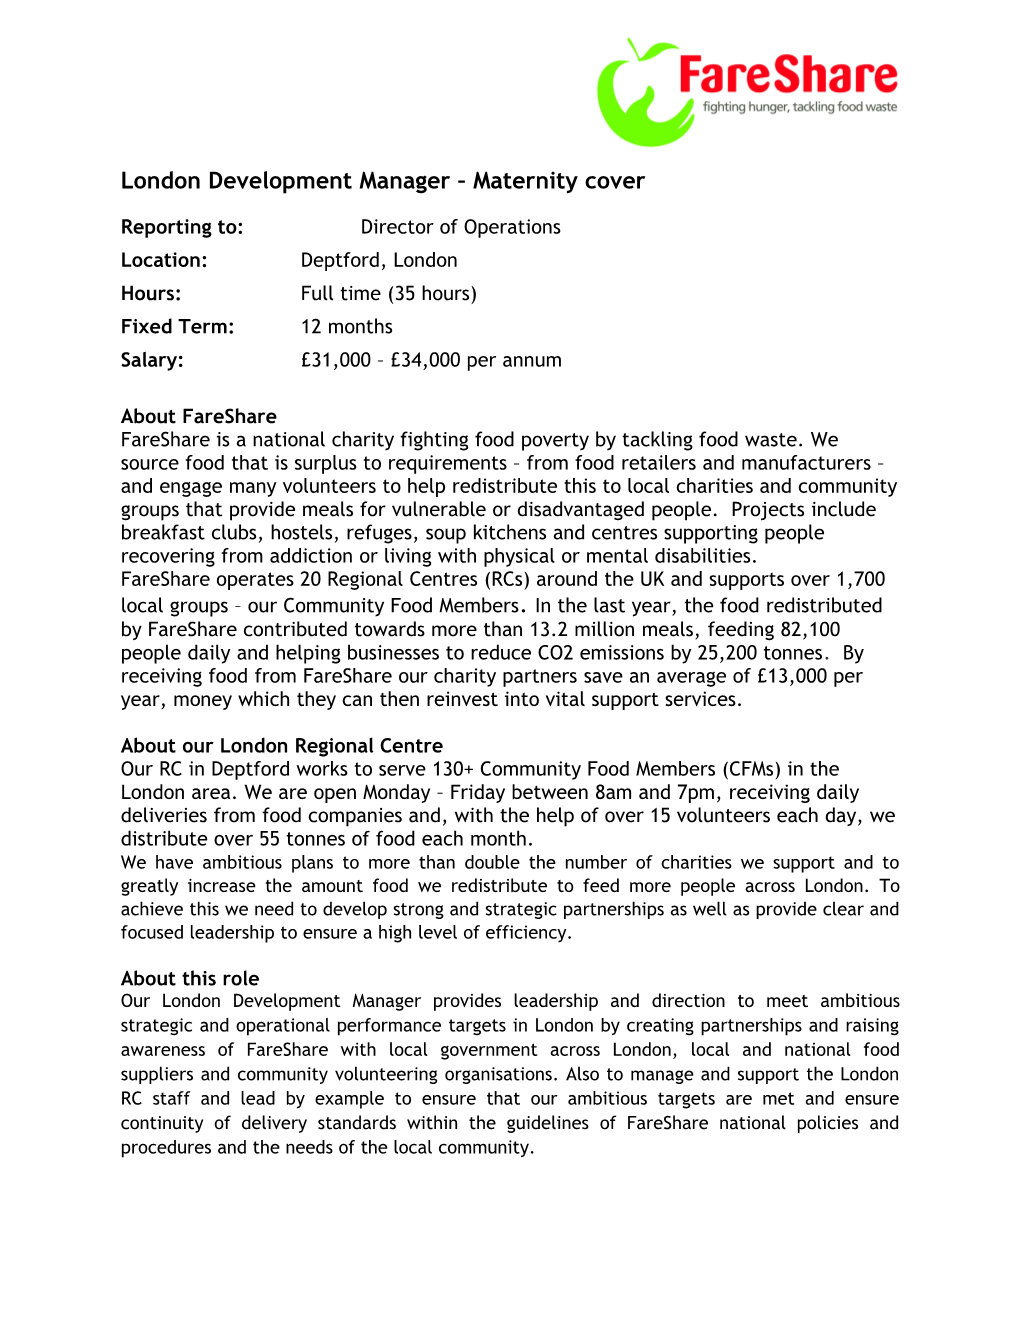 London Development Manager Maternity Cover